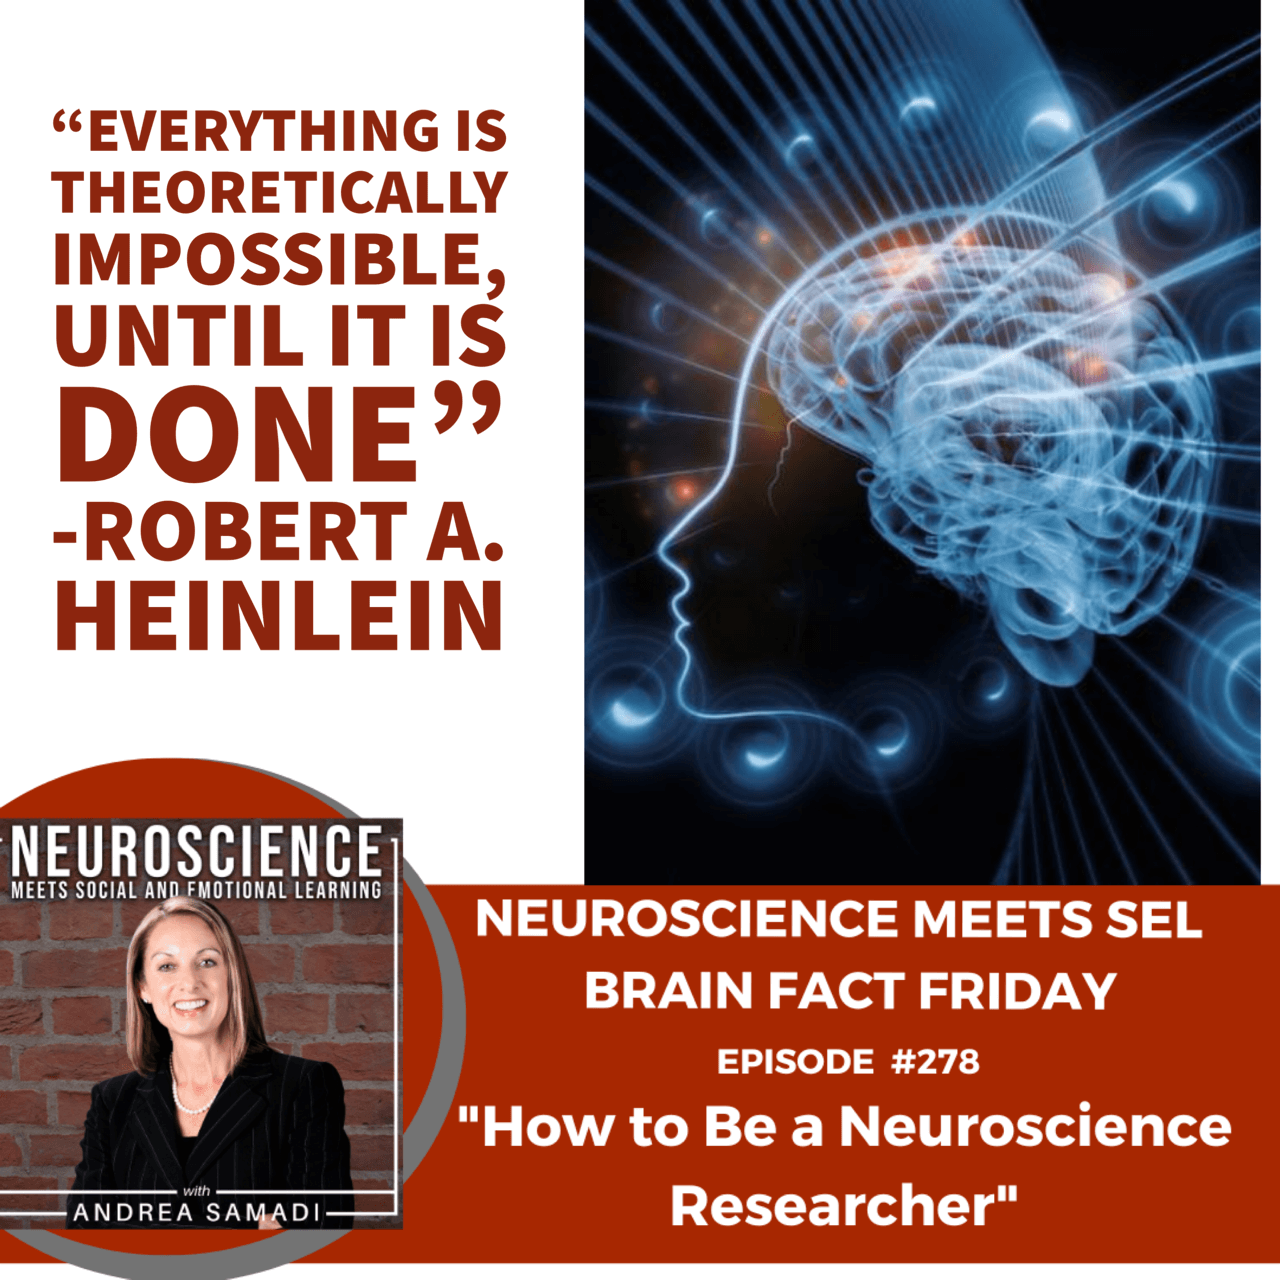 Brain Fact Friday ”How to Be a Neuroscience Researcher” Using Our Creativity